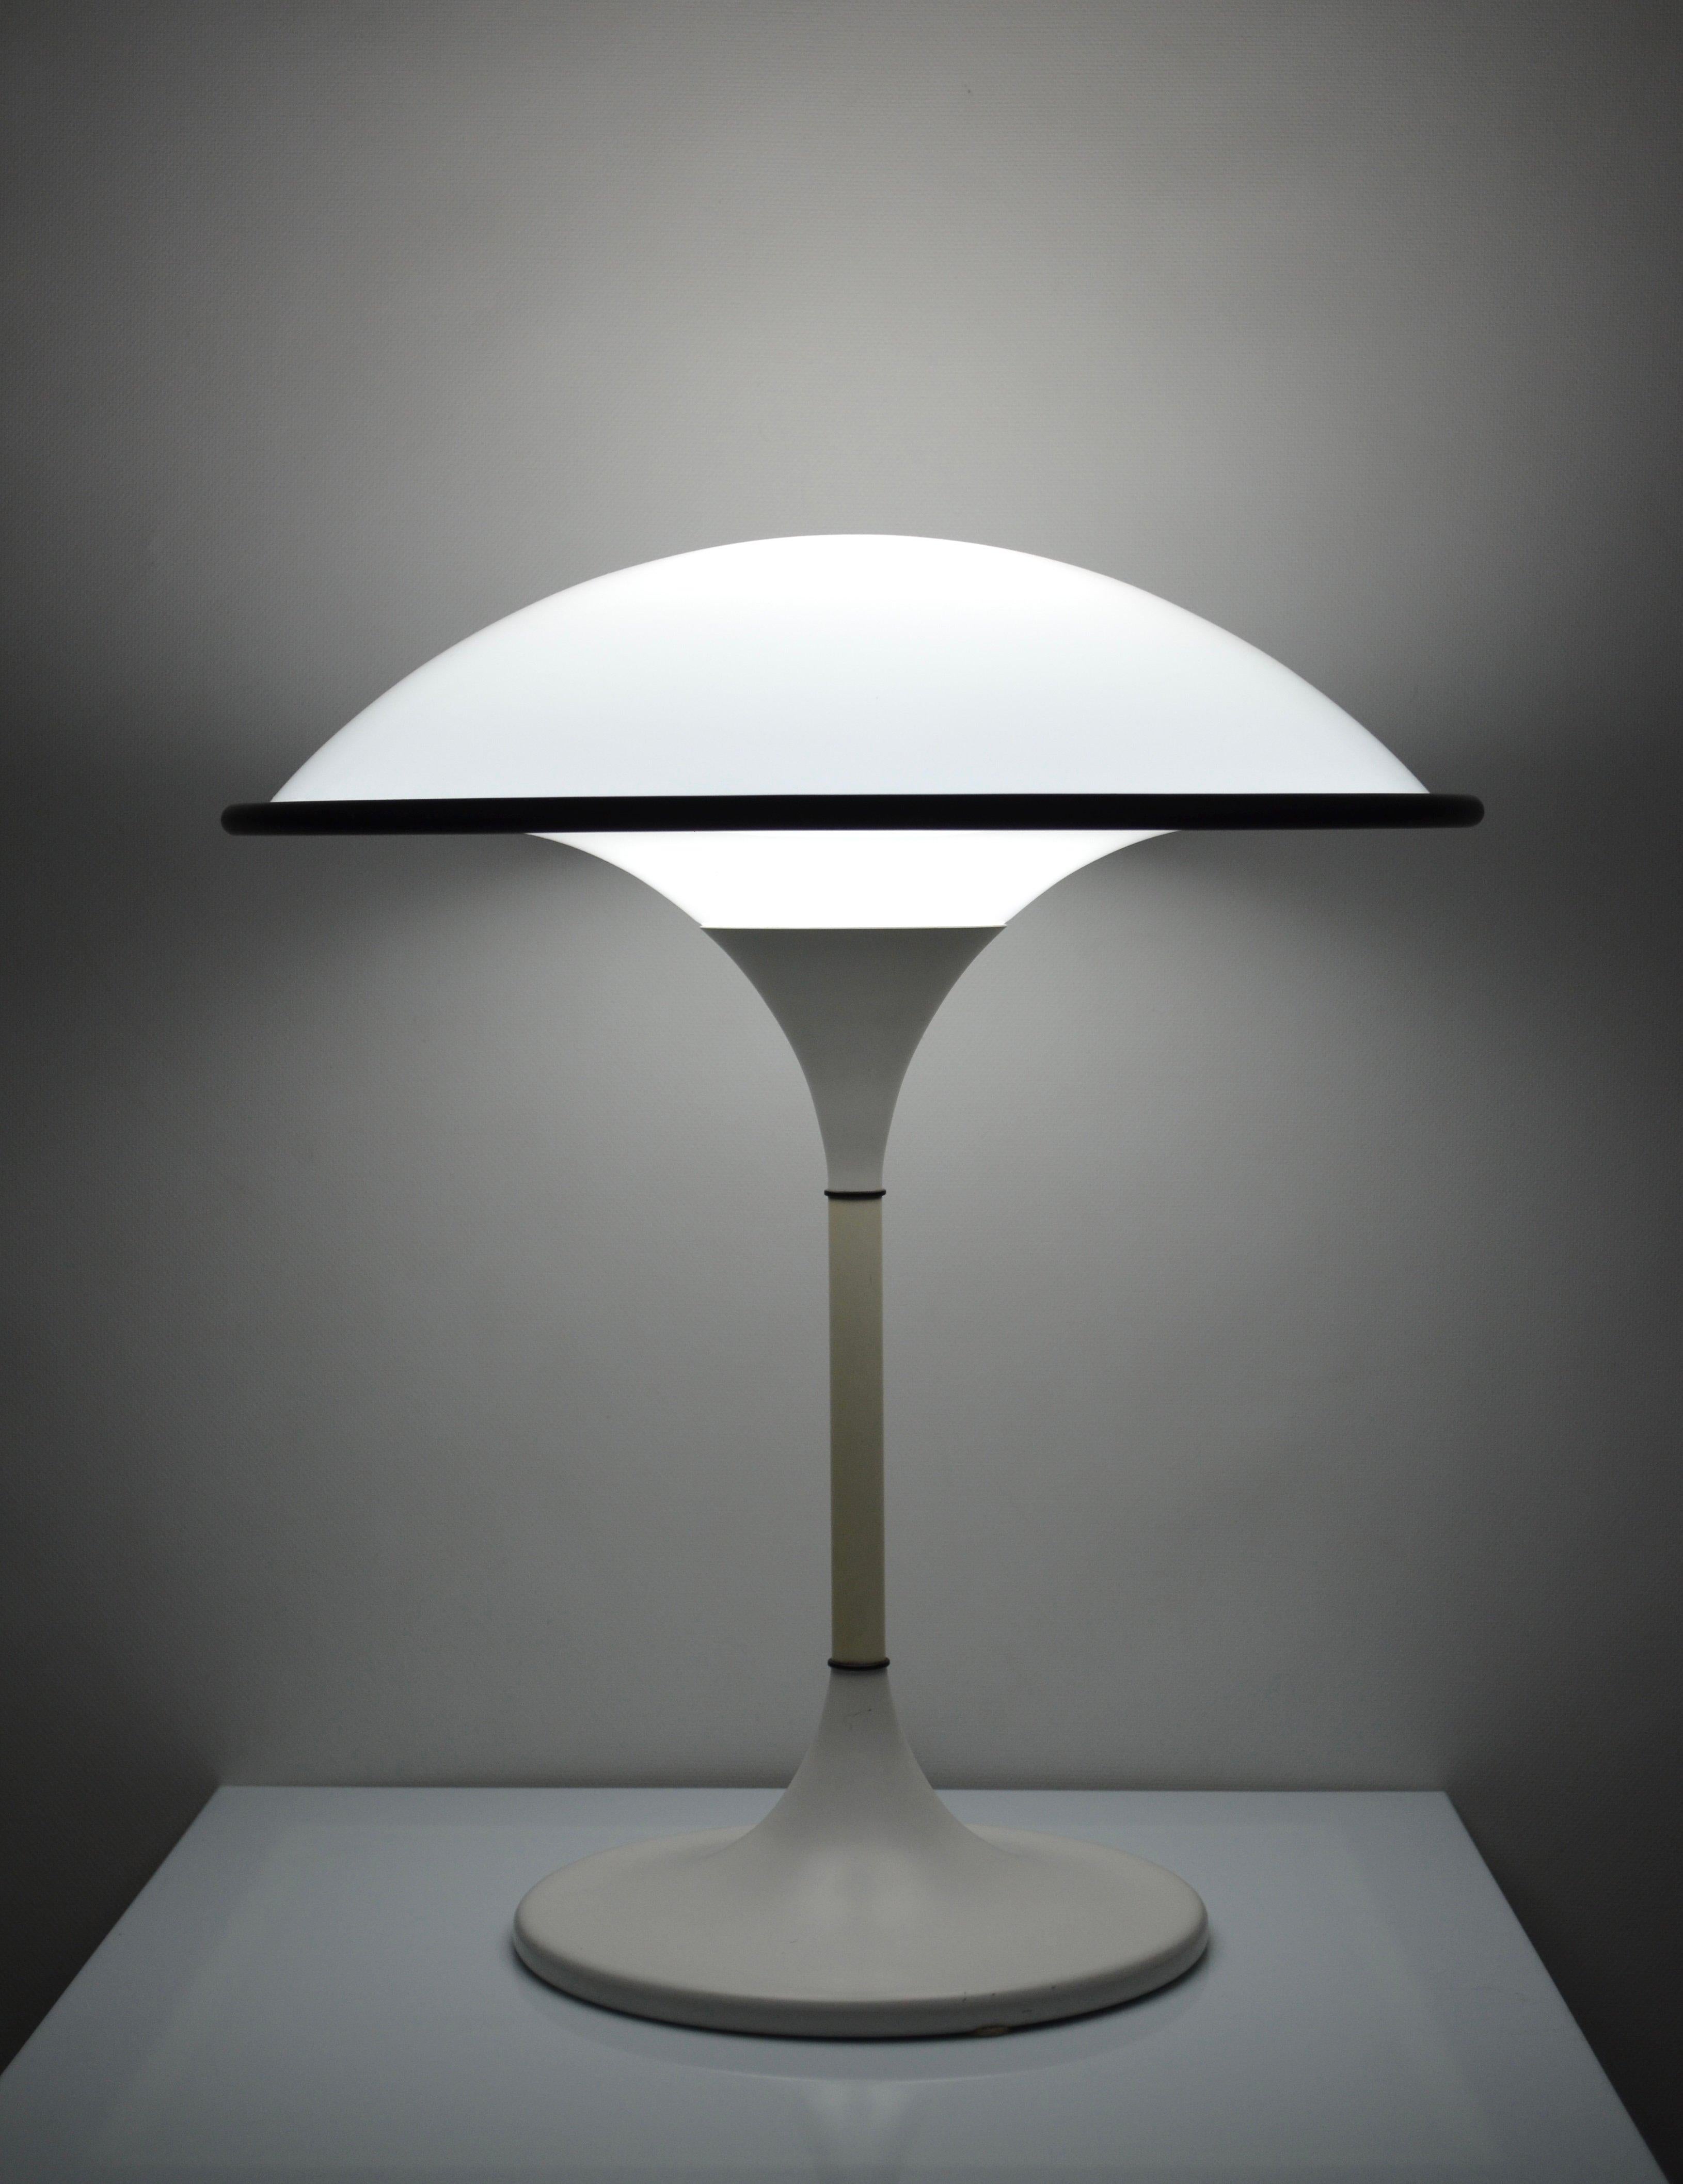 Rare ufo-shaped lamp in the Space Age style made by Preben Jacobsen for Fog Morup in 1984.
It diffuses a superb light thanks to its semi-spherical polymer diffuser underlined by its black rubber belt. 
The base is in white lacquered metal.